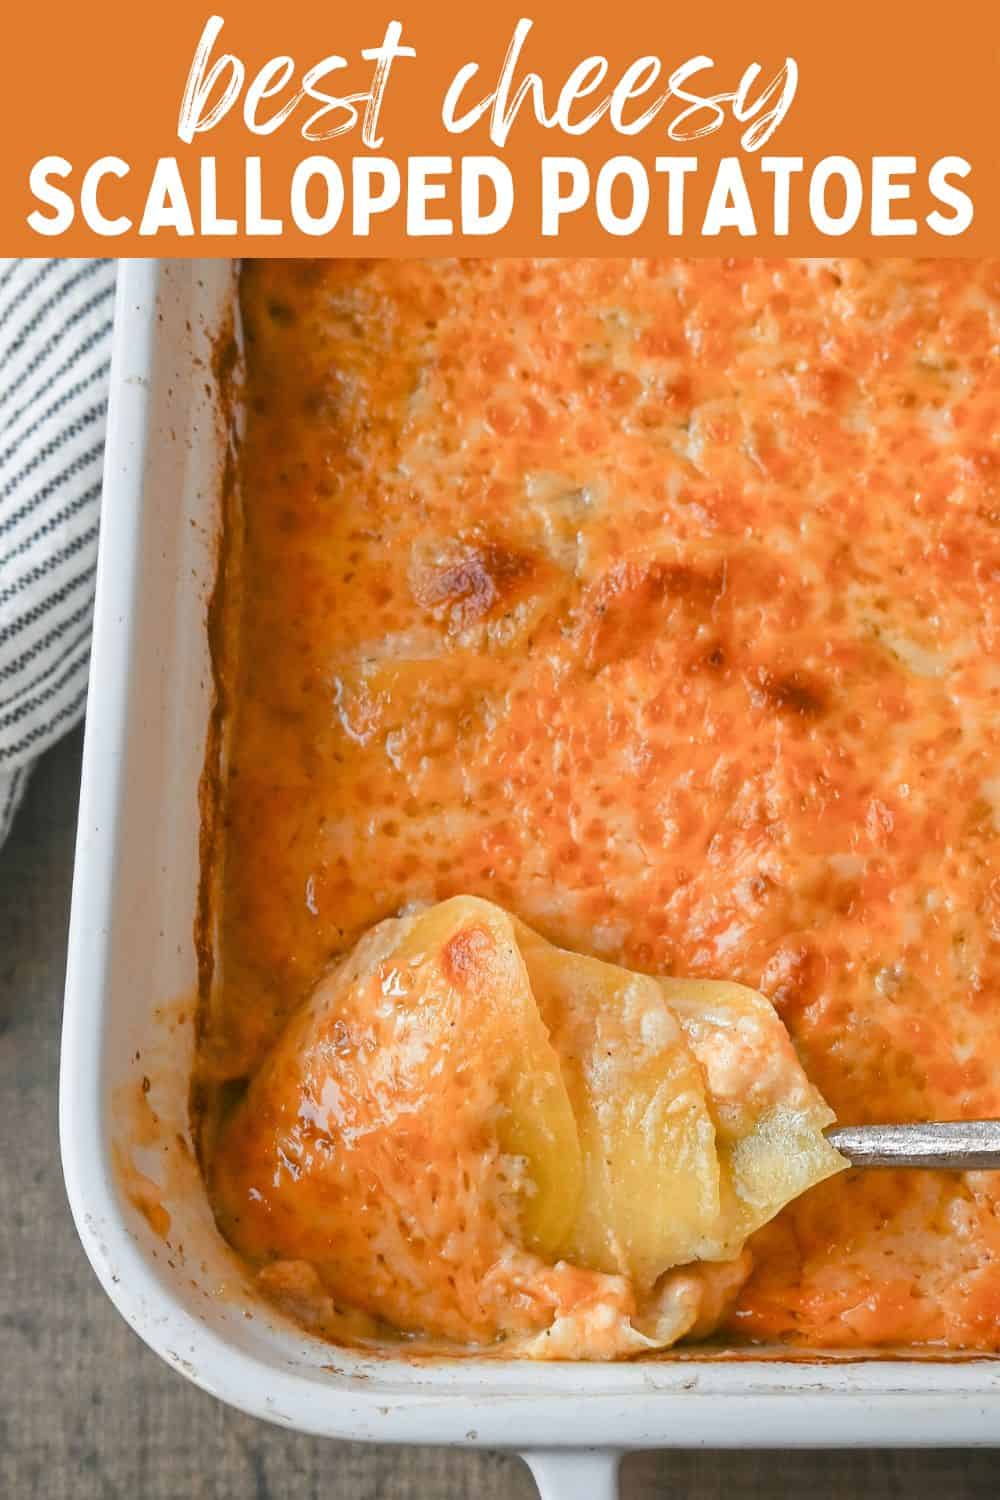 Cheesy Scalloped Potatoes. These creamy, cheesy scalloped potatoes are the perfect side dish and are made with thinly sliced potatoes, a decadent bechamel sauce, and layers upon layers of cheese and baked until melted and bubbly.